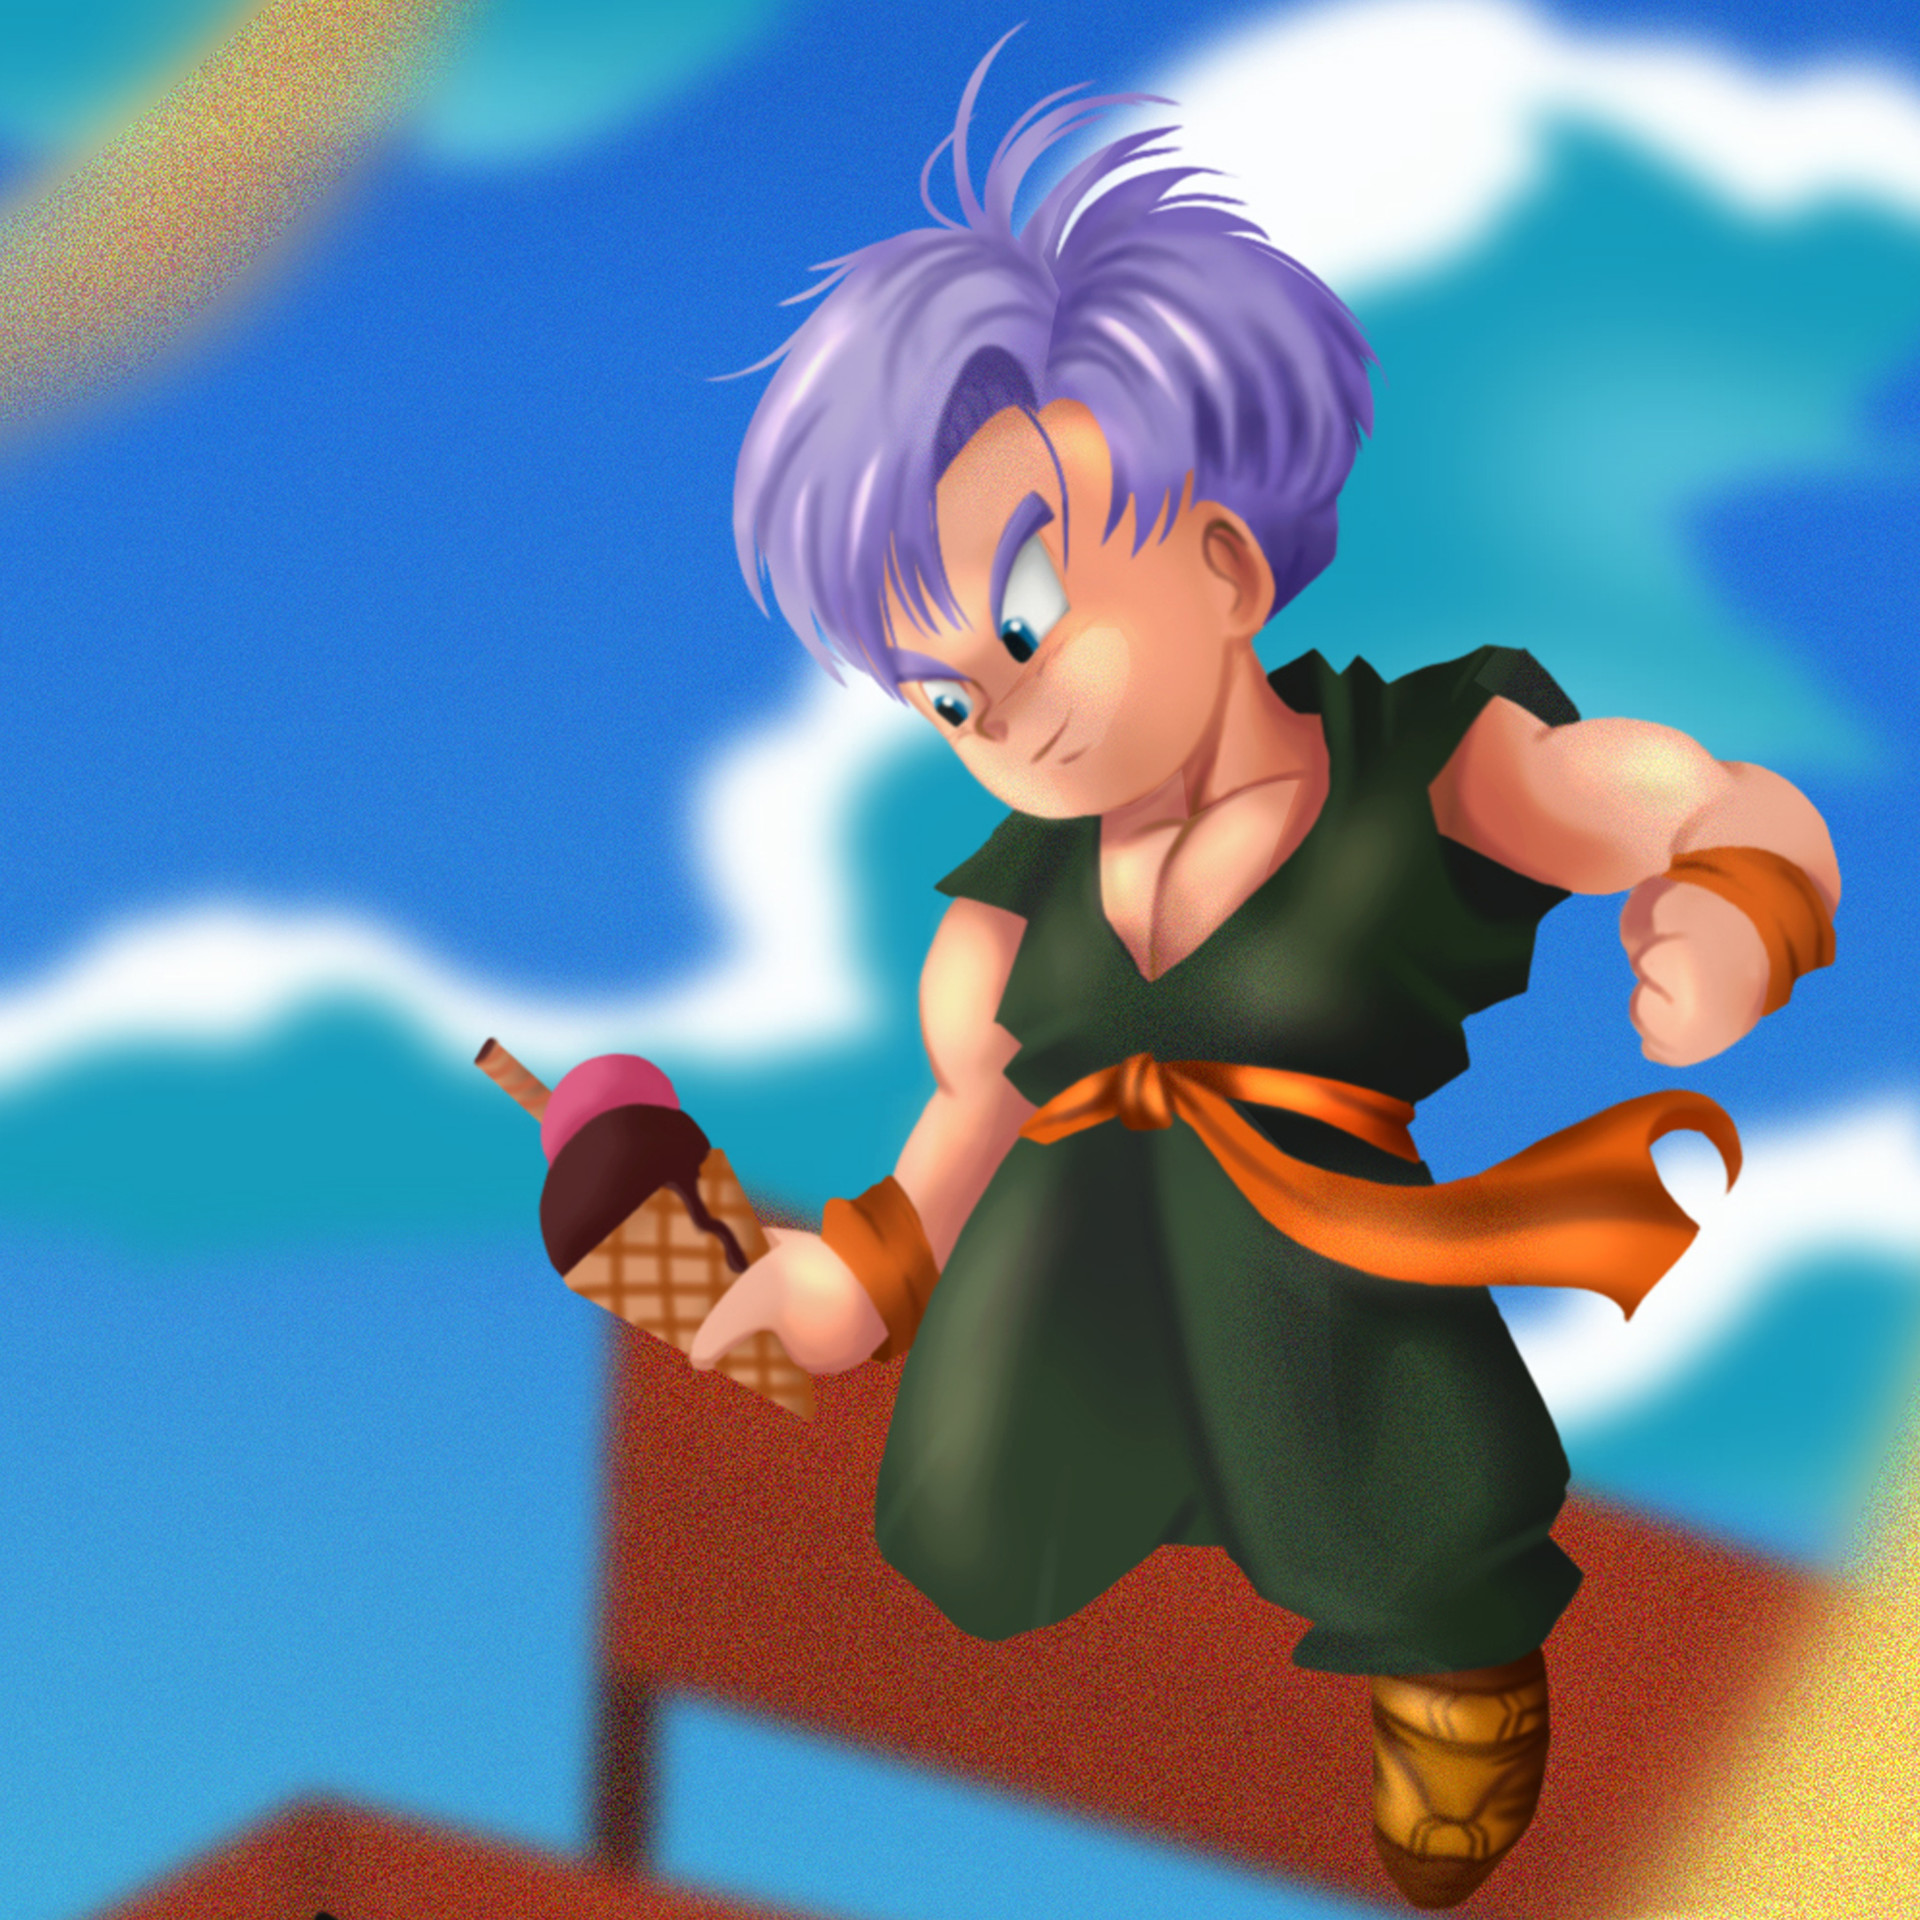 Dragon Ball: Future Trunks' Last 10 Fights In The Anime, Ranked